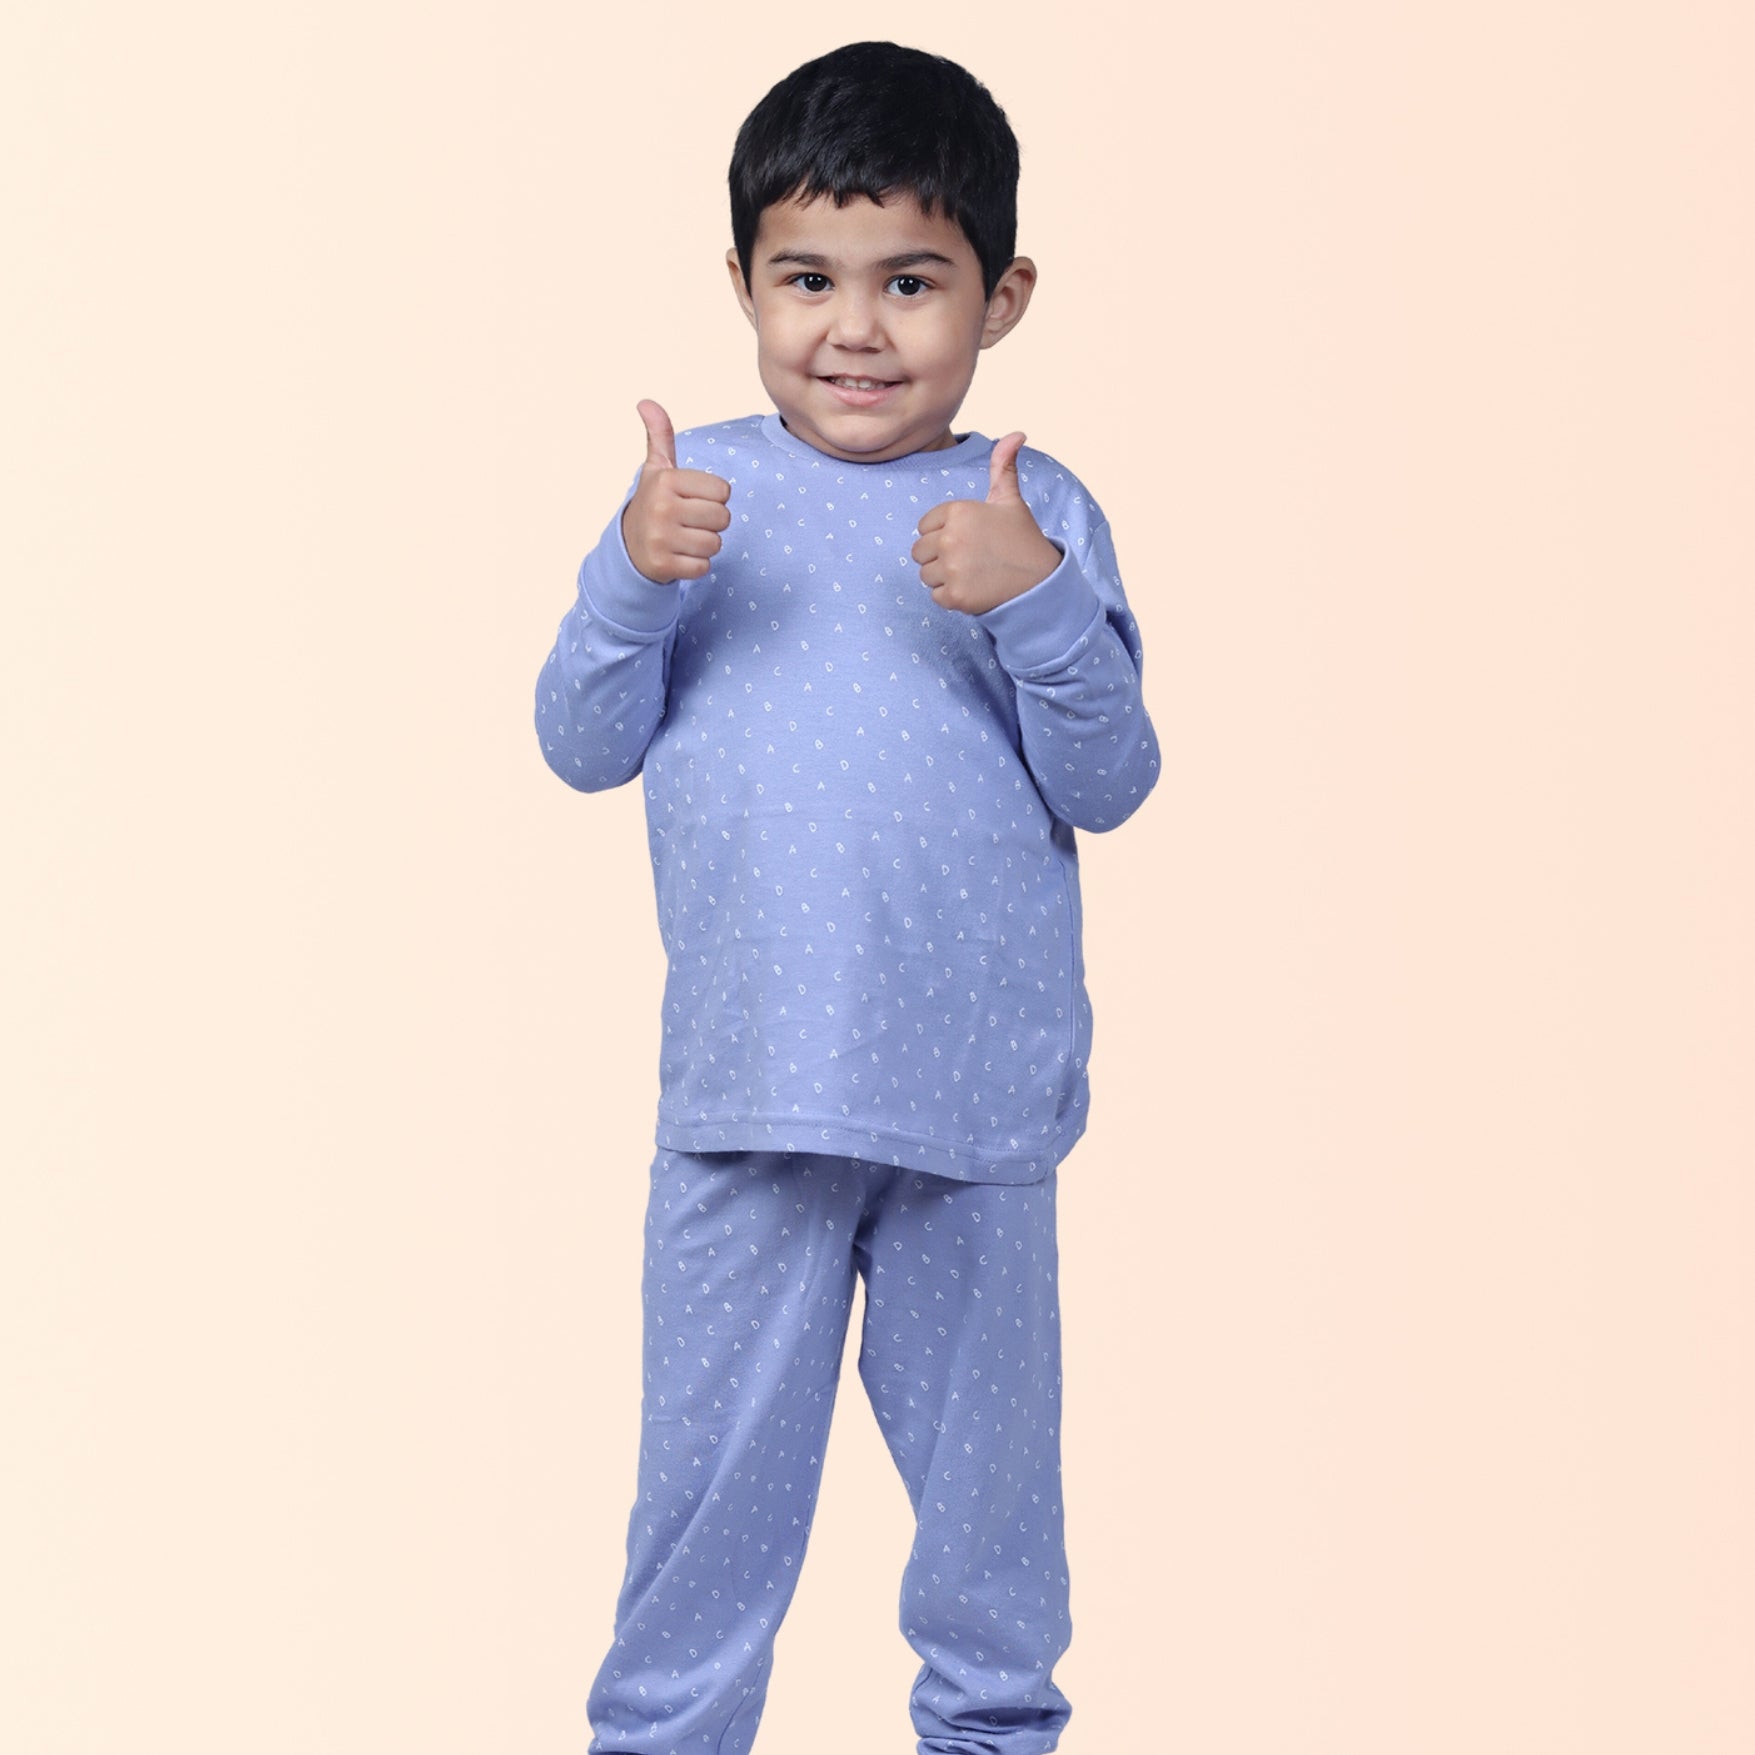 Full Sleeve Night Suit For Kids In Purple Colour - Alphabet